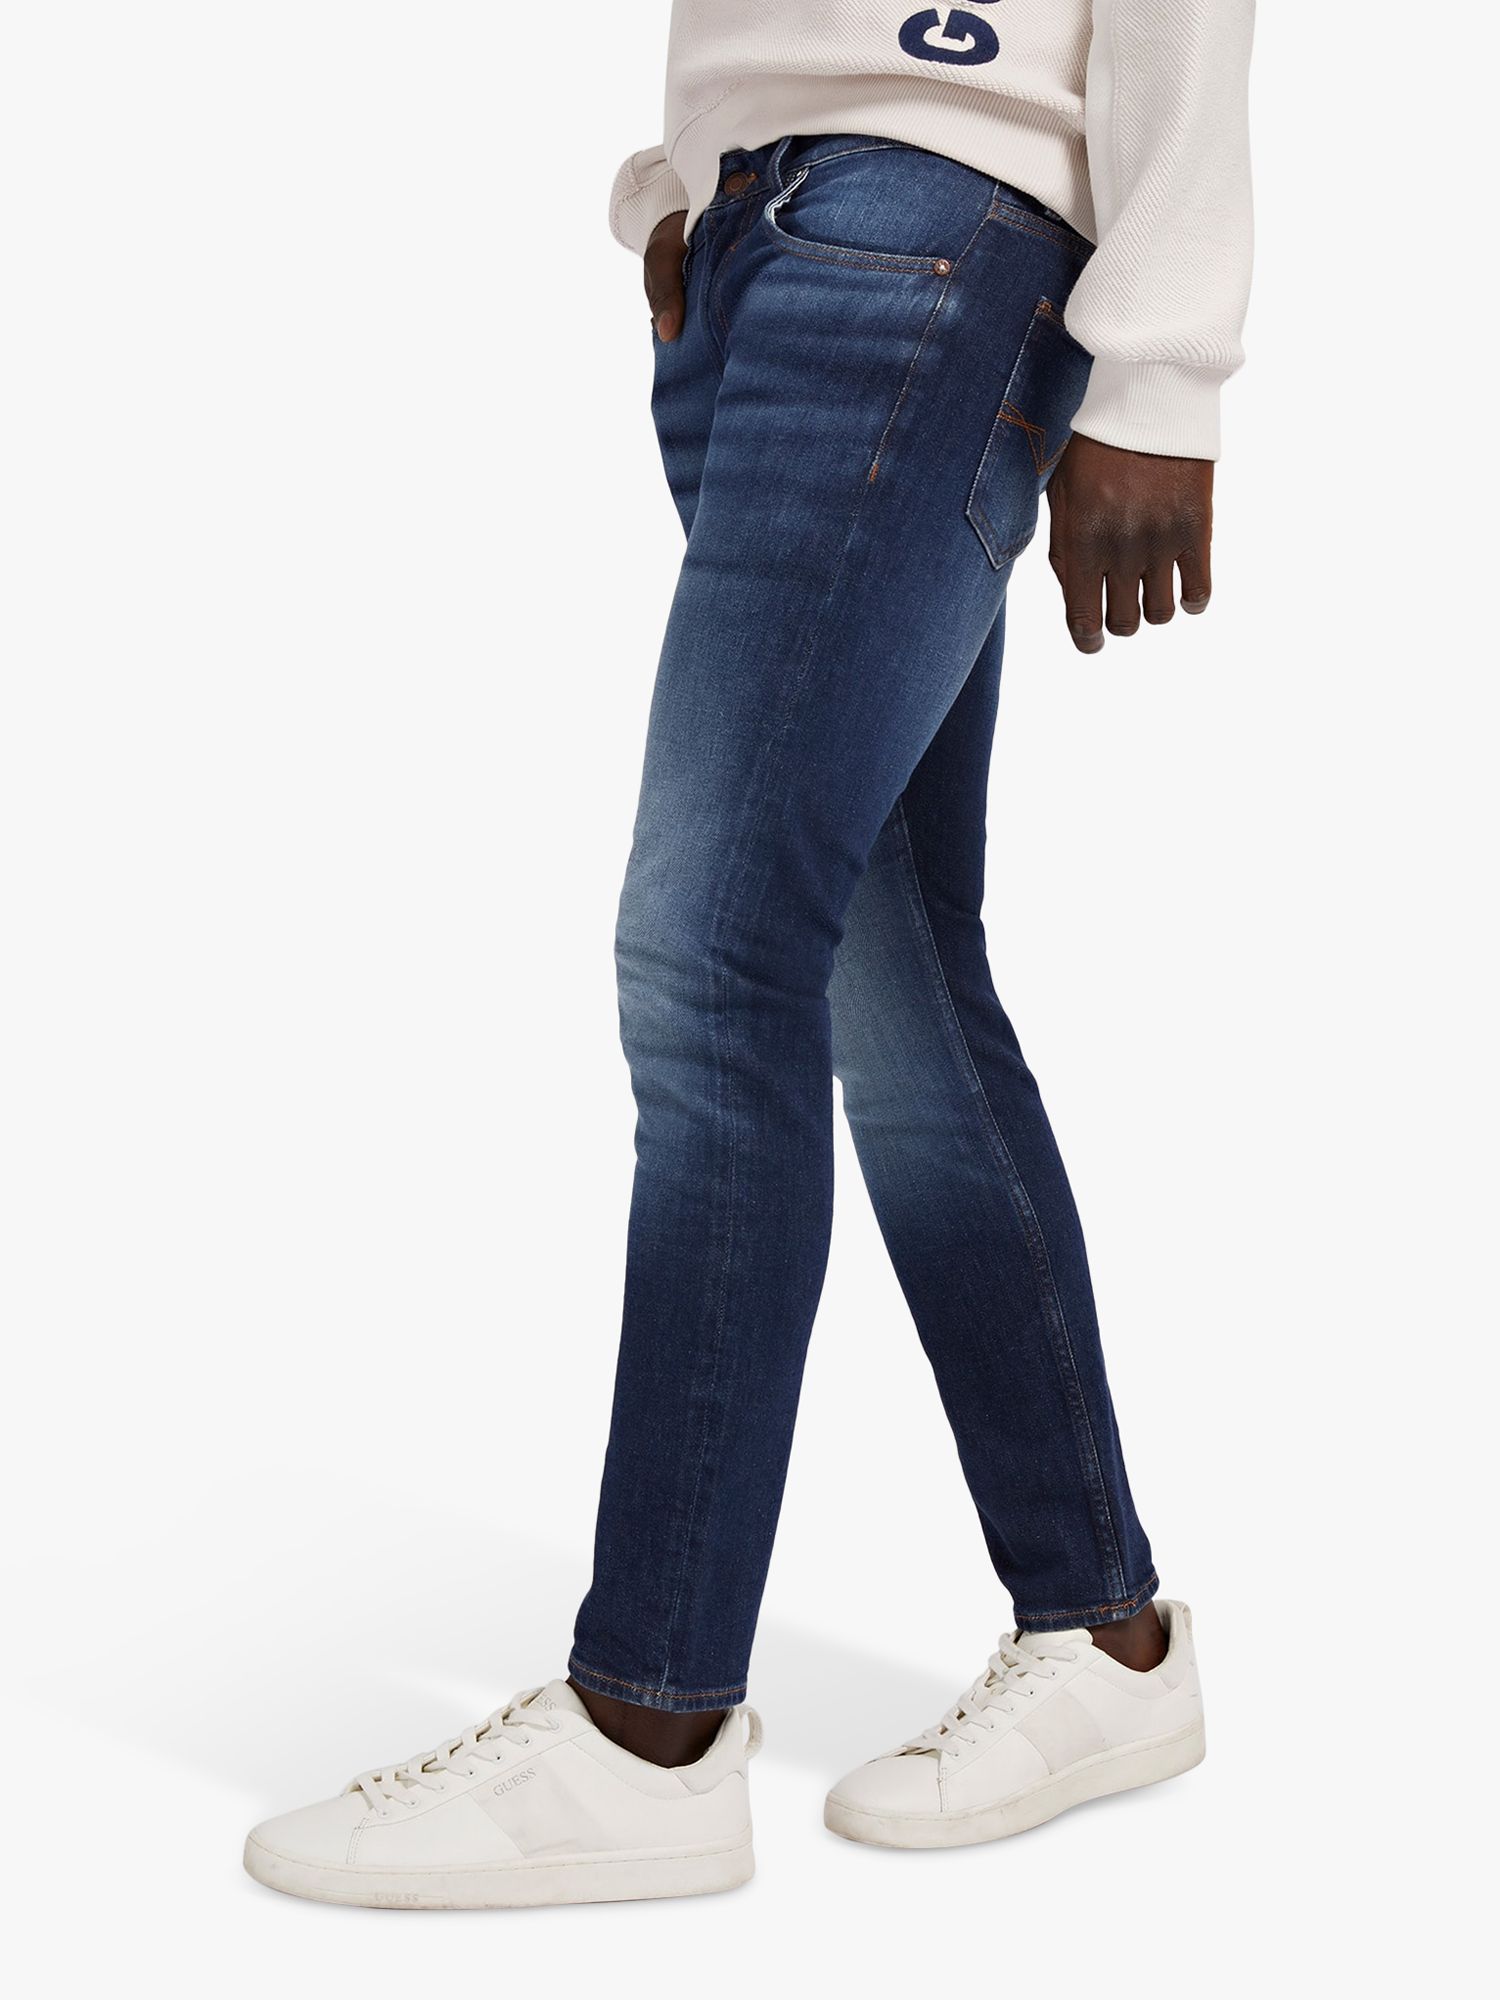 Buy GUESS Miami Skinny Fit Jeans Online at johnlewis.com